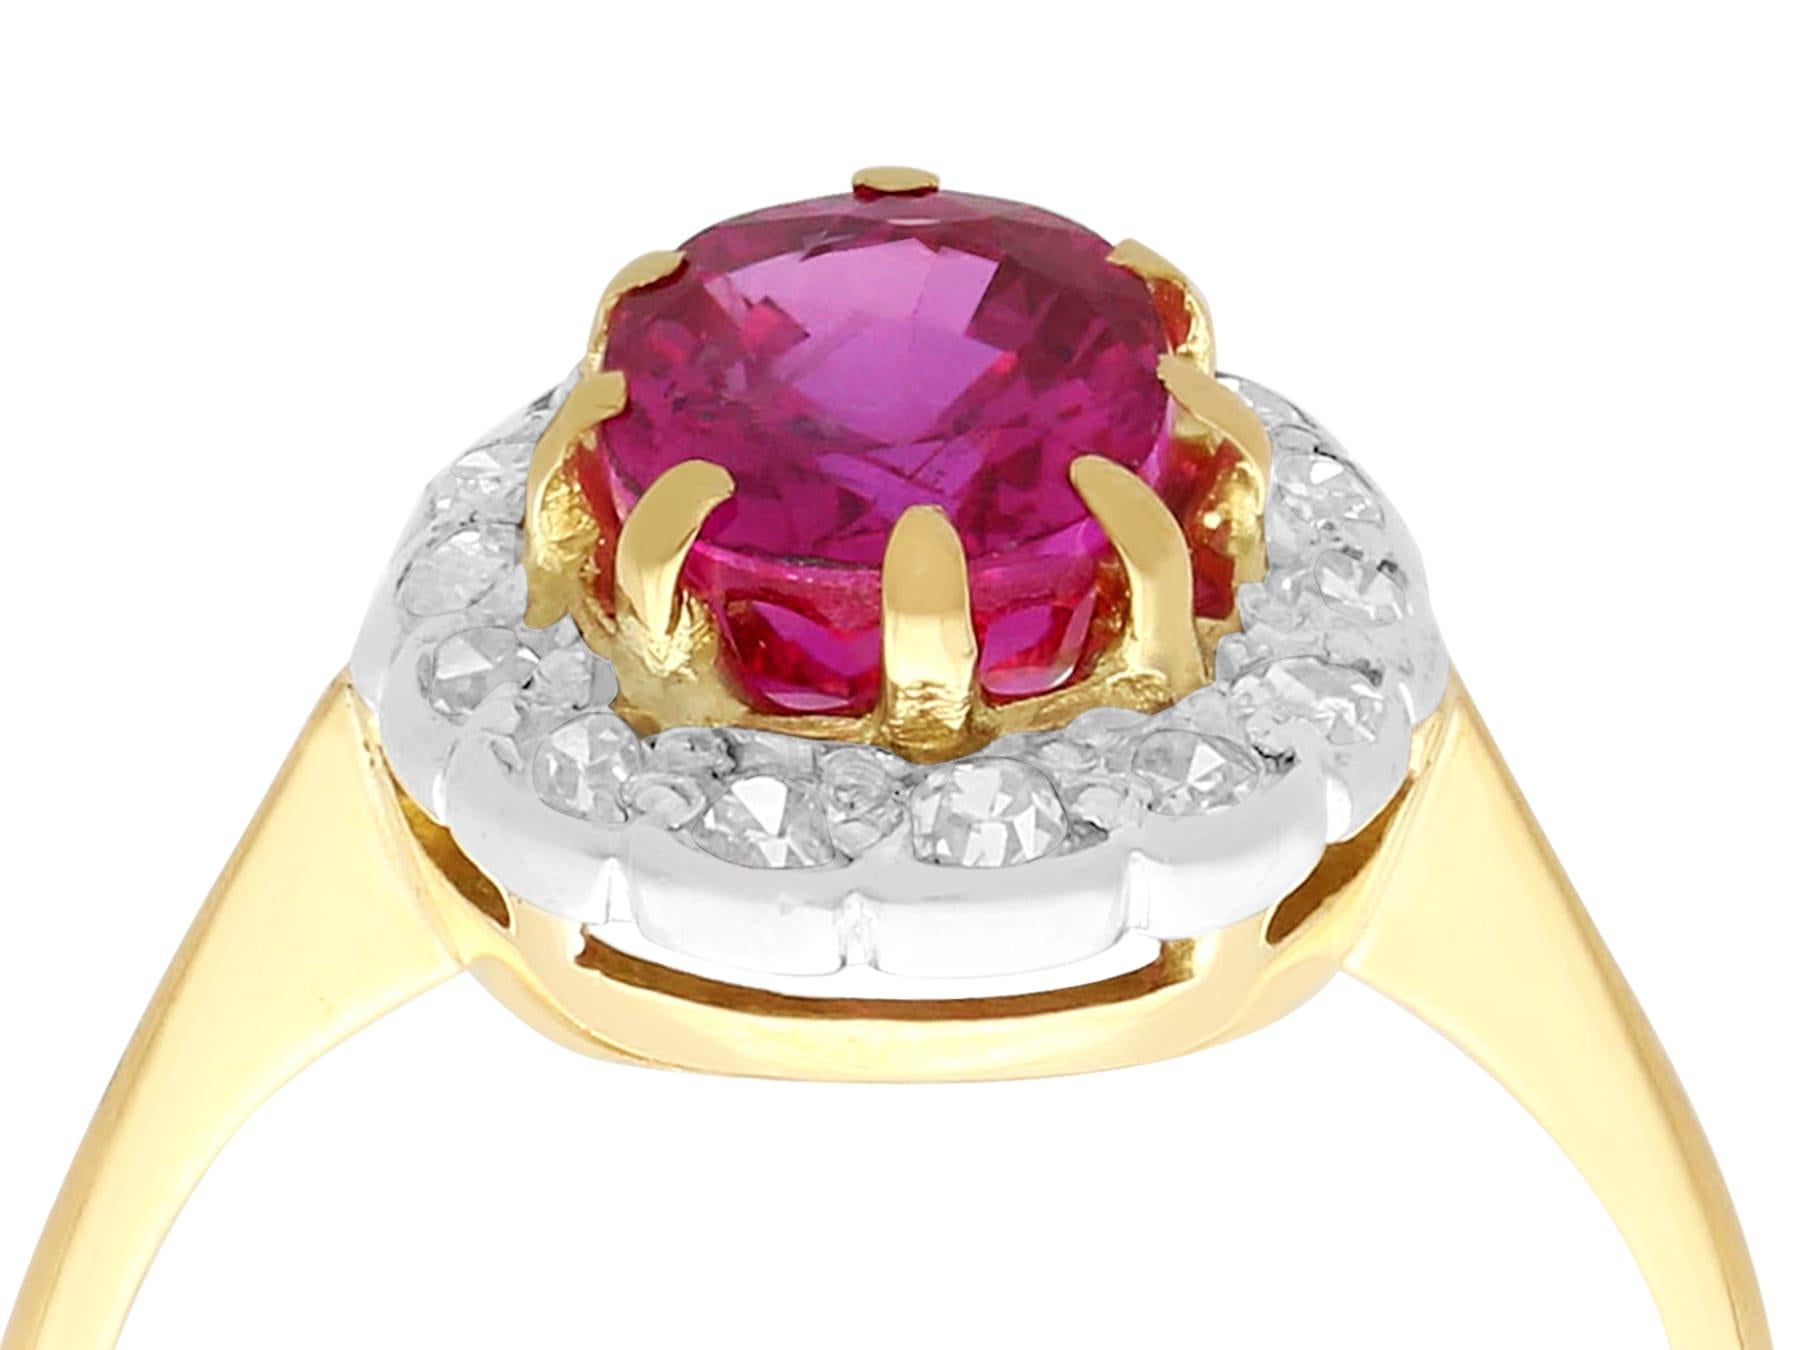 A fine and impressive vintage 1.55 carat natural ruby and 0.33 carat diamond, 18 karat yellow gold, 18 karat white gold set cocktail ring; part of our vintage jewelry and estate jewelry collections.

This impressive vintage ruby cluster ring has